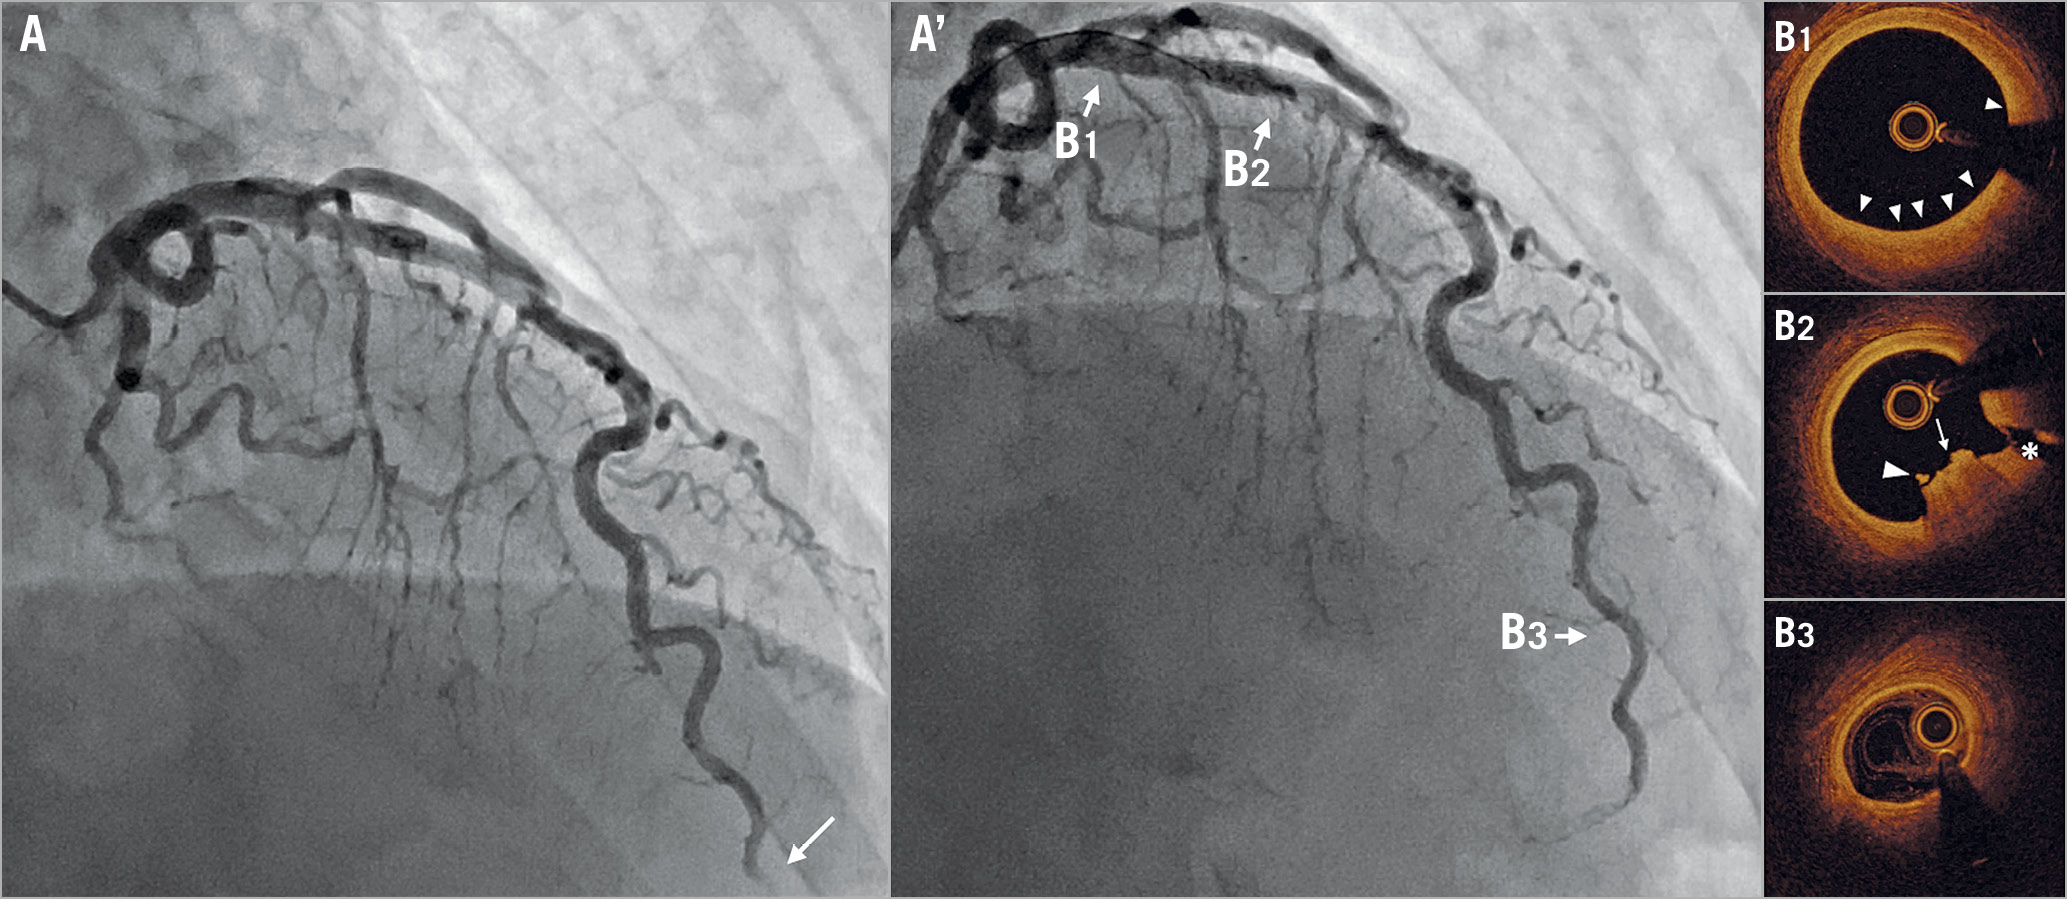 Figure 1. Coronary angiography and OCT images after thrombus aspiration from the distal portion of the LAD. Initial coronary angiography (A, Moving image 1) showed total occlusion at the distal portion of the LAD (arrow). Coronary flow was recovered after thrombus aspiration (A’). OCT pullback was from distal to proximal of the LAD. OCT pullback was performed twice to investigate the long lesions of the LAD. The first pullback was from the distal to the middle portion and the second pullback was from the middle portion to the guiding catheter (Moving image 2, Moving image 3). At the proximal segment, there was intimal hyperplasia (B1), and plaque erosion with thrombus (arrows), and the side branch (asterisk) were observed (B2). At the distal portion, three layers of coronary artery wall were maintained (B3).